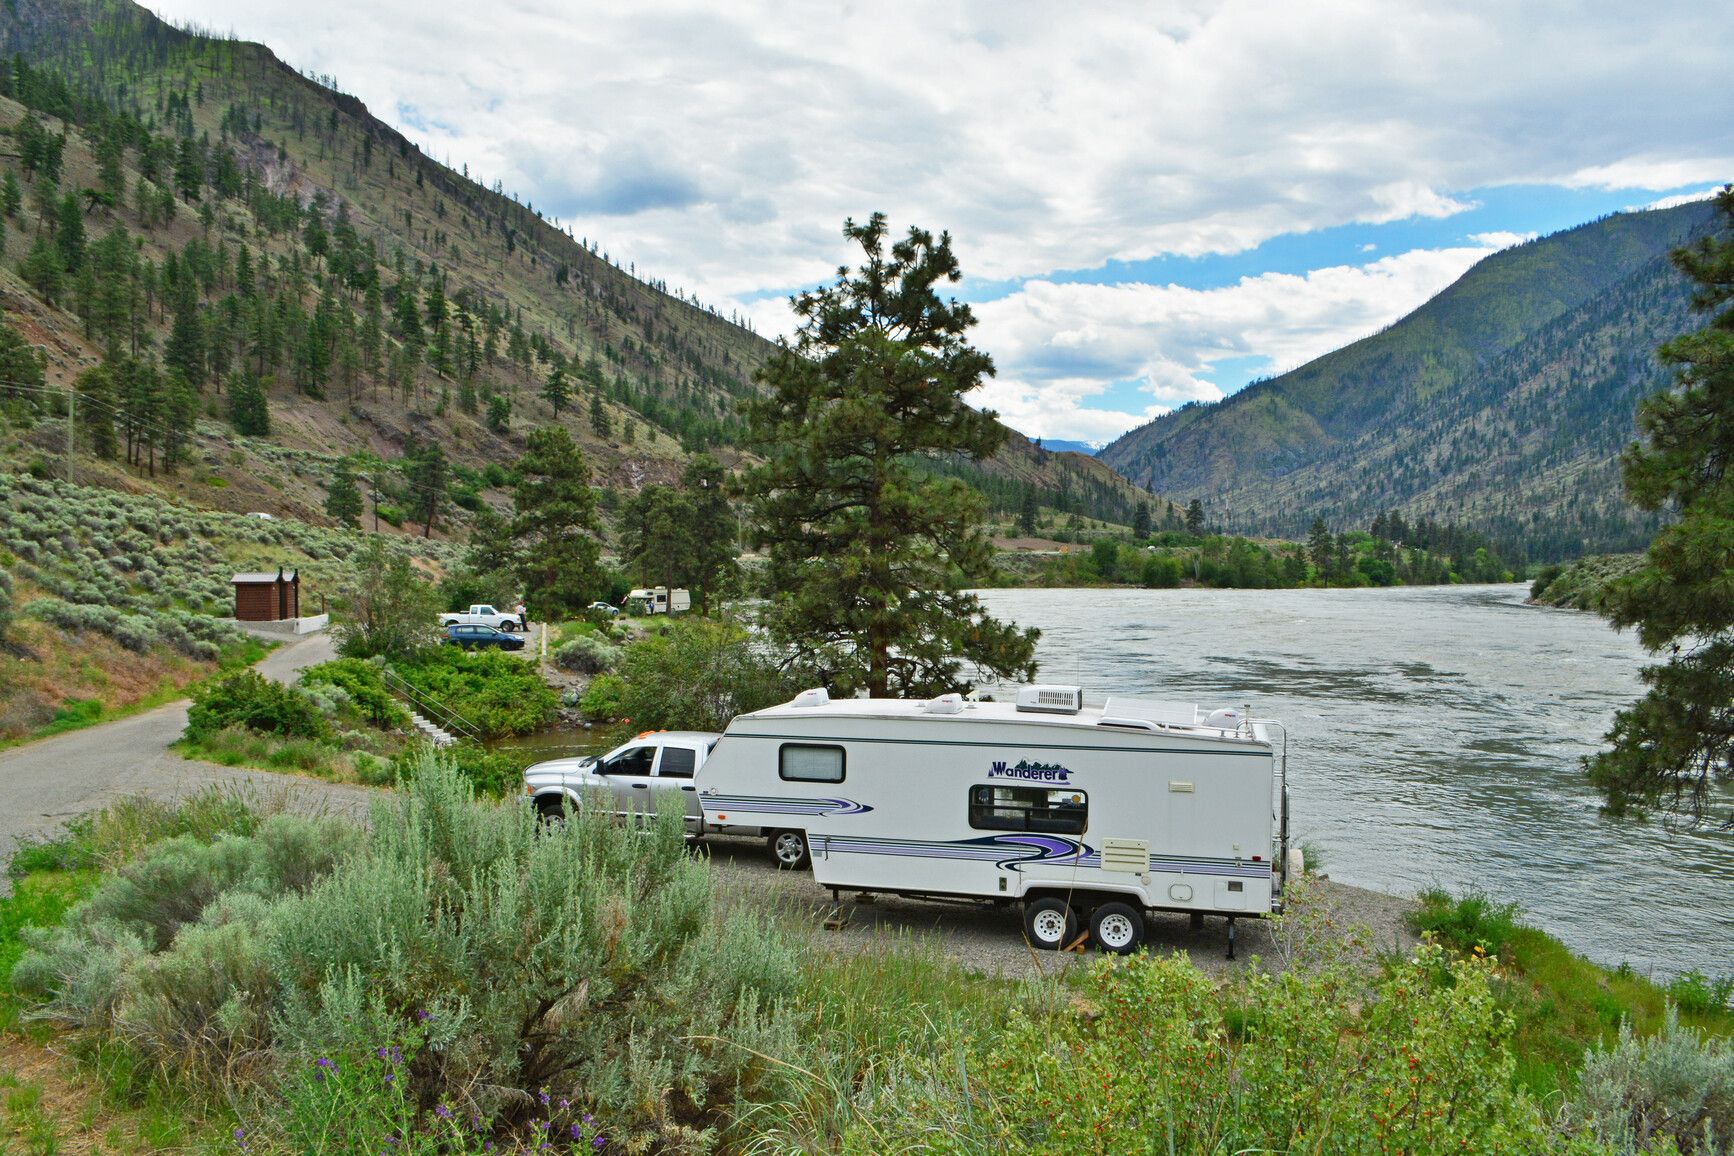 Goldpan Park campground along the Thompson River.